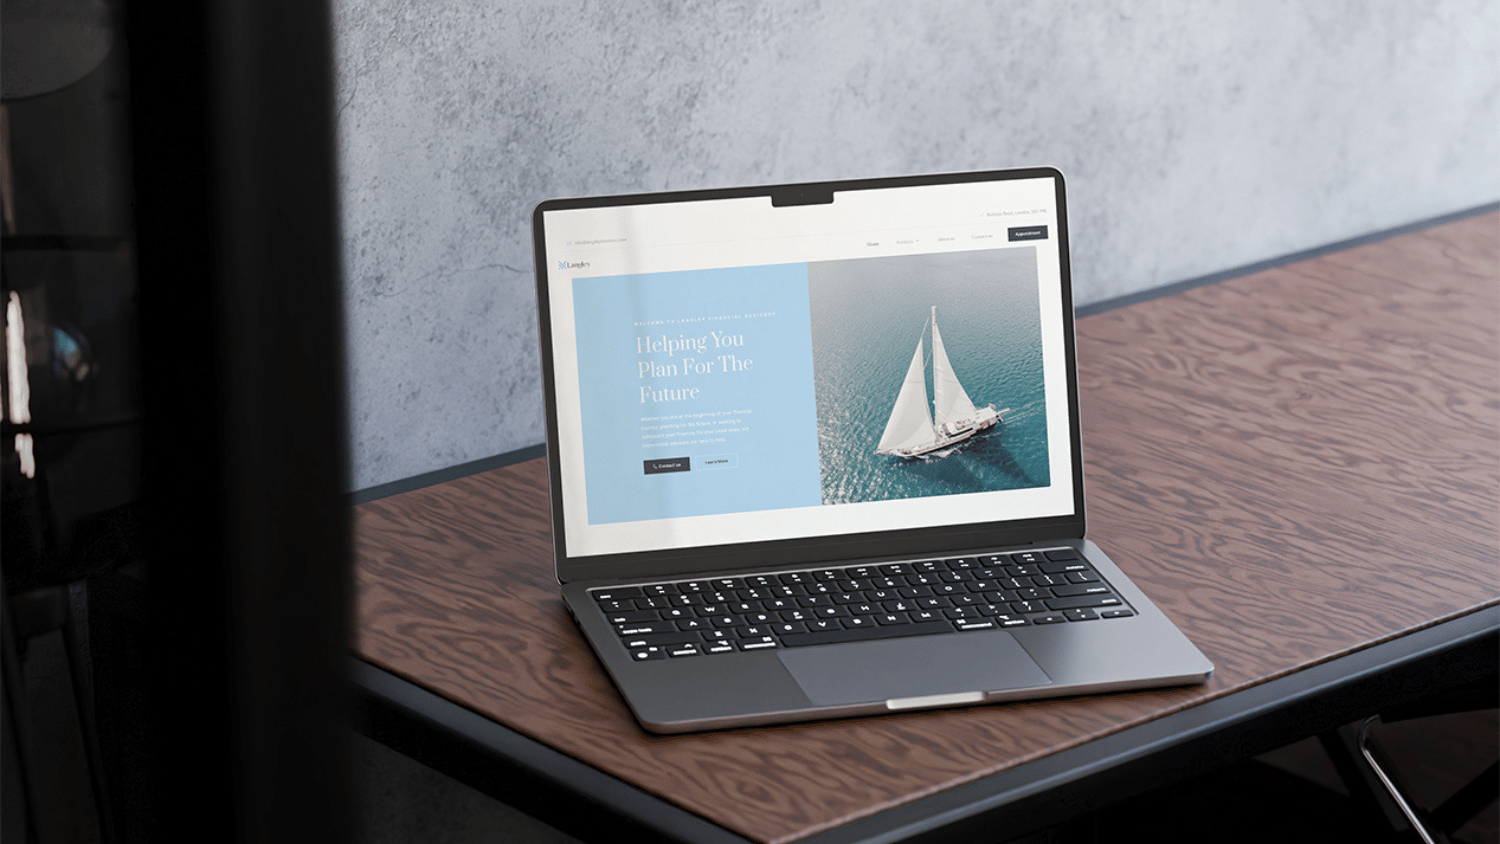 Laptop on a wooden desk displaying a web design for a financial planning website with an image of a sailboat on the screen.